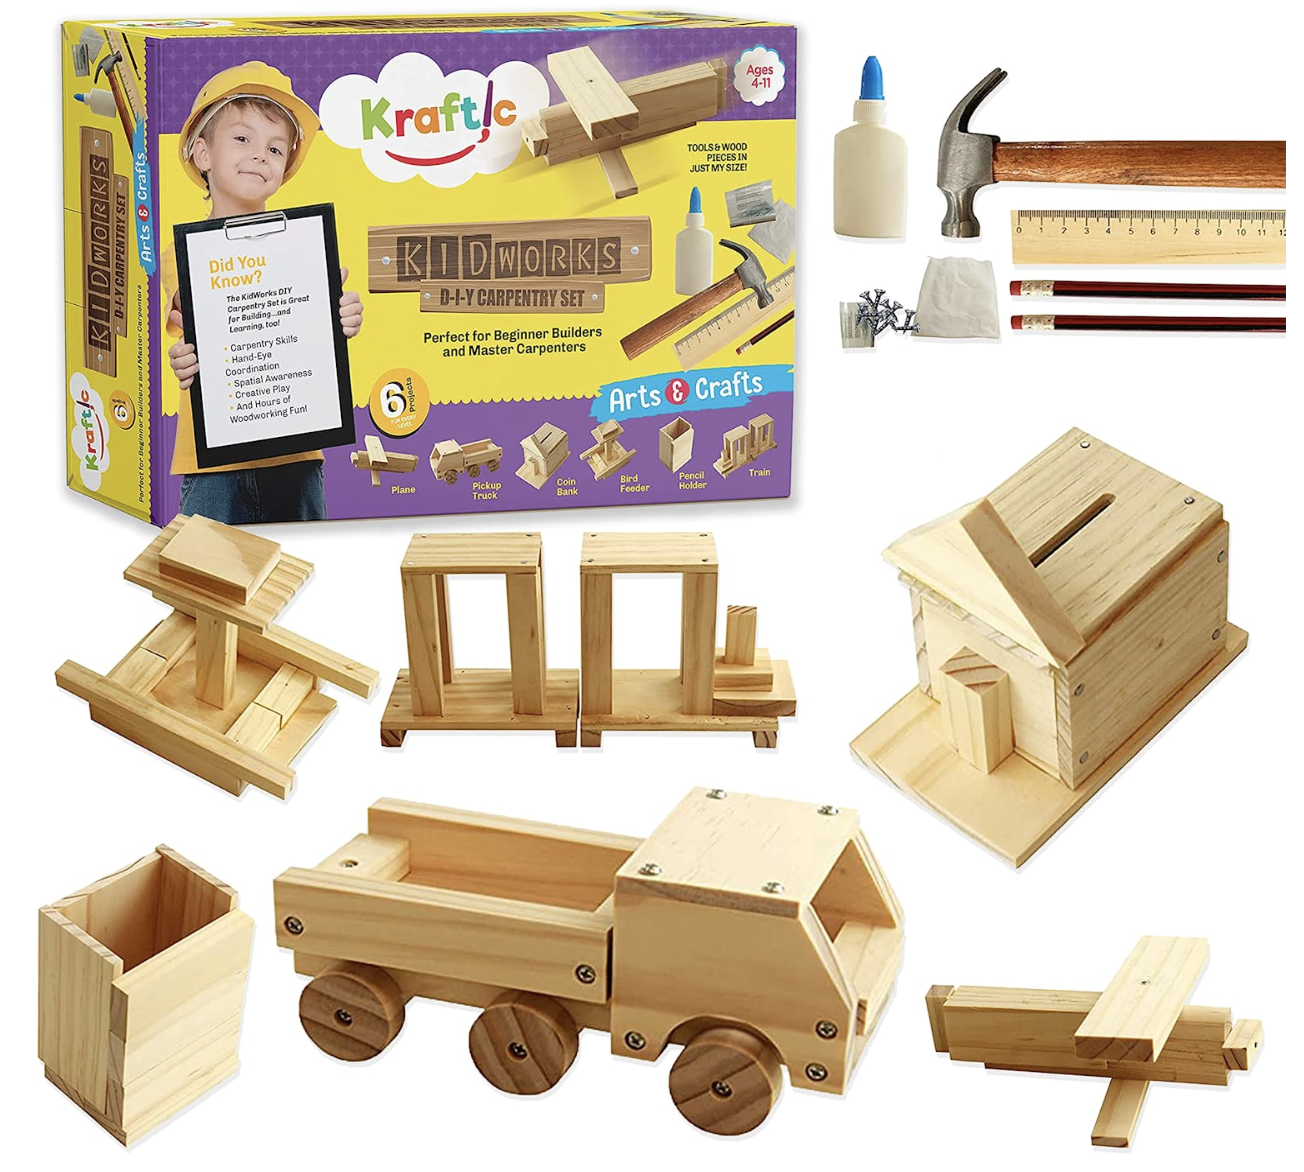 Woodworking Skills-based Gift for Kids